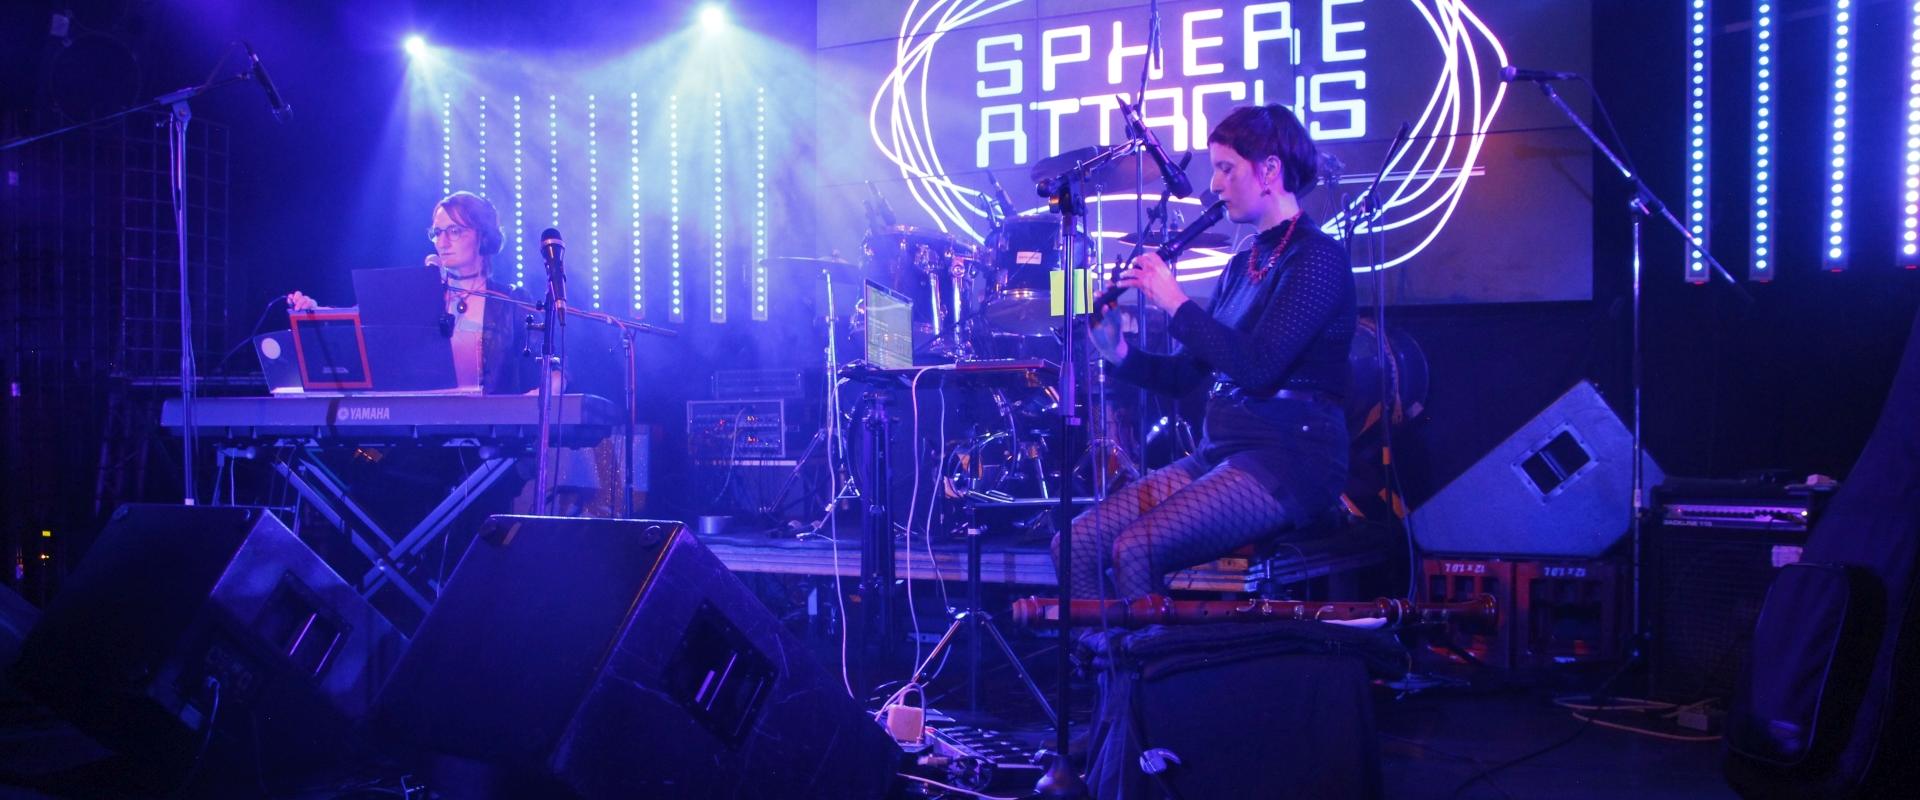 Band: Sphere Attacks